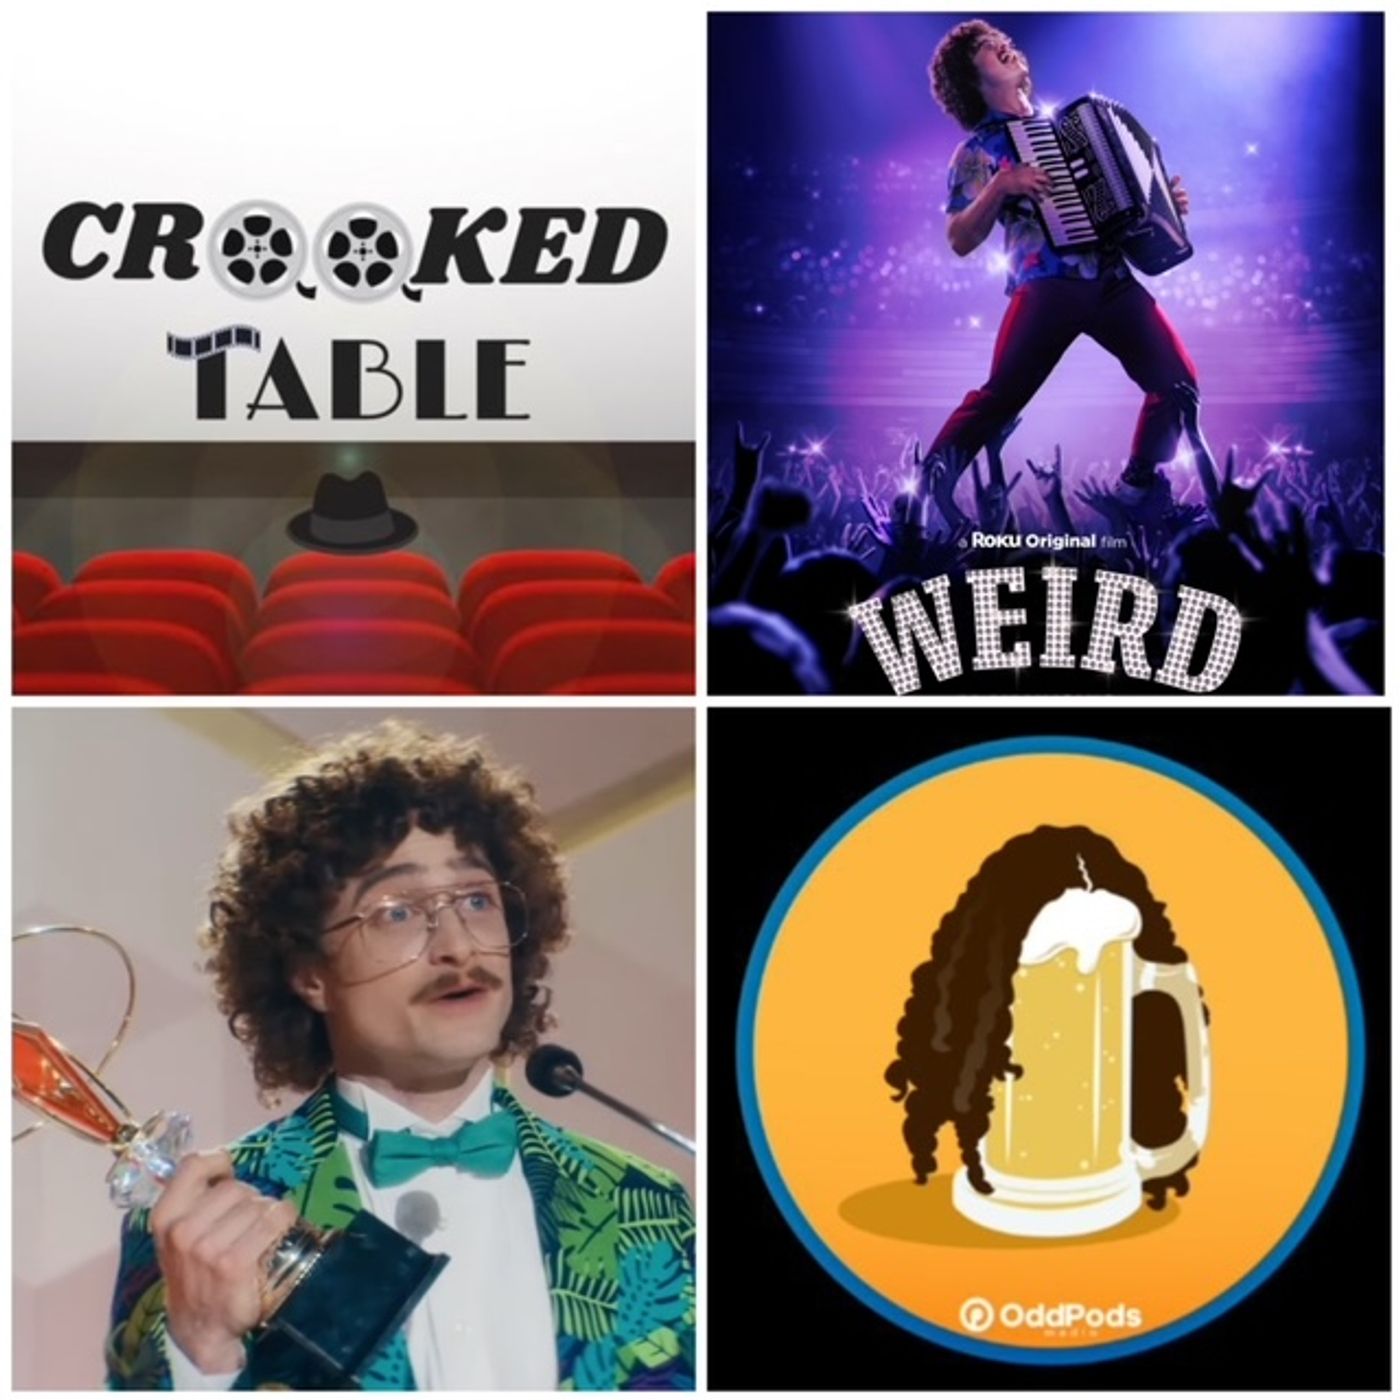 Very Special Episode: WEIRD The Al Yankovic Story Pre-Party ft. Robert from Crooked Table Image